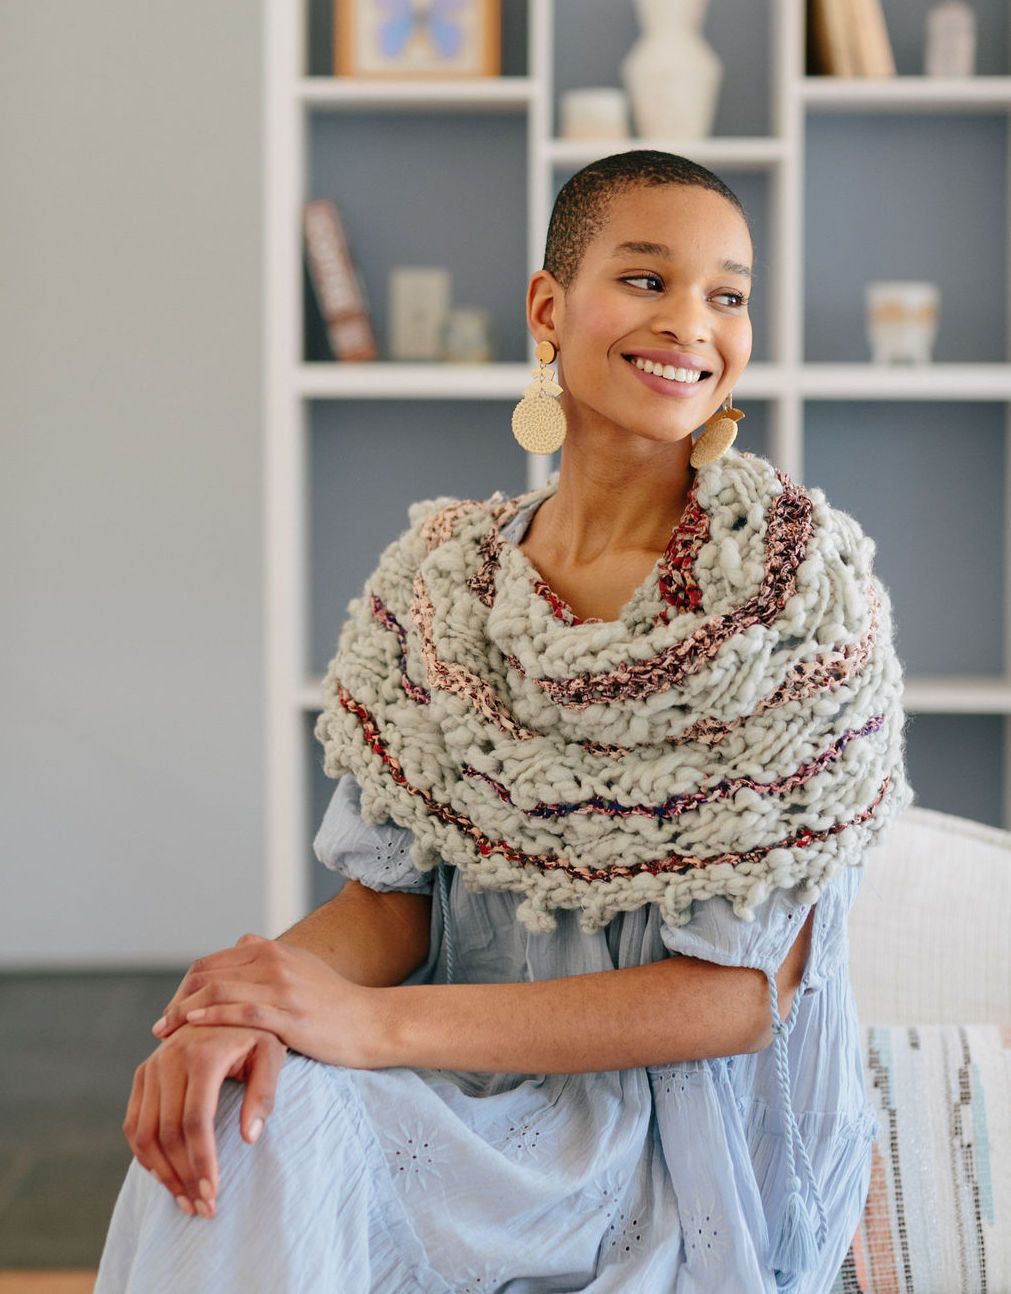 Model smiling with hands on knee wearing a shawl.